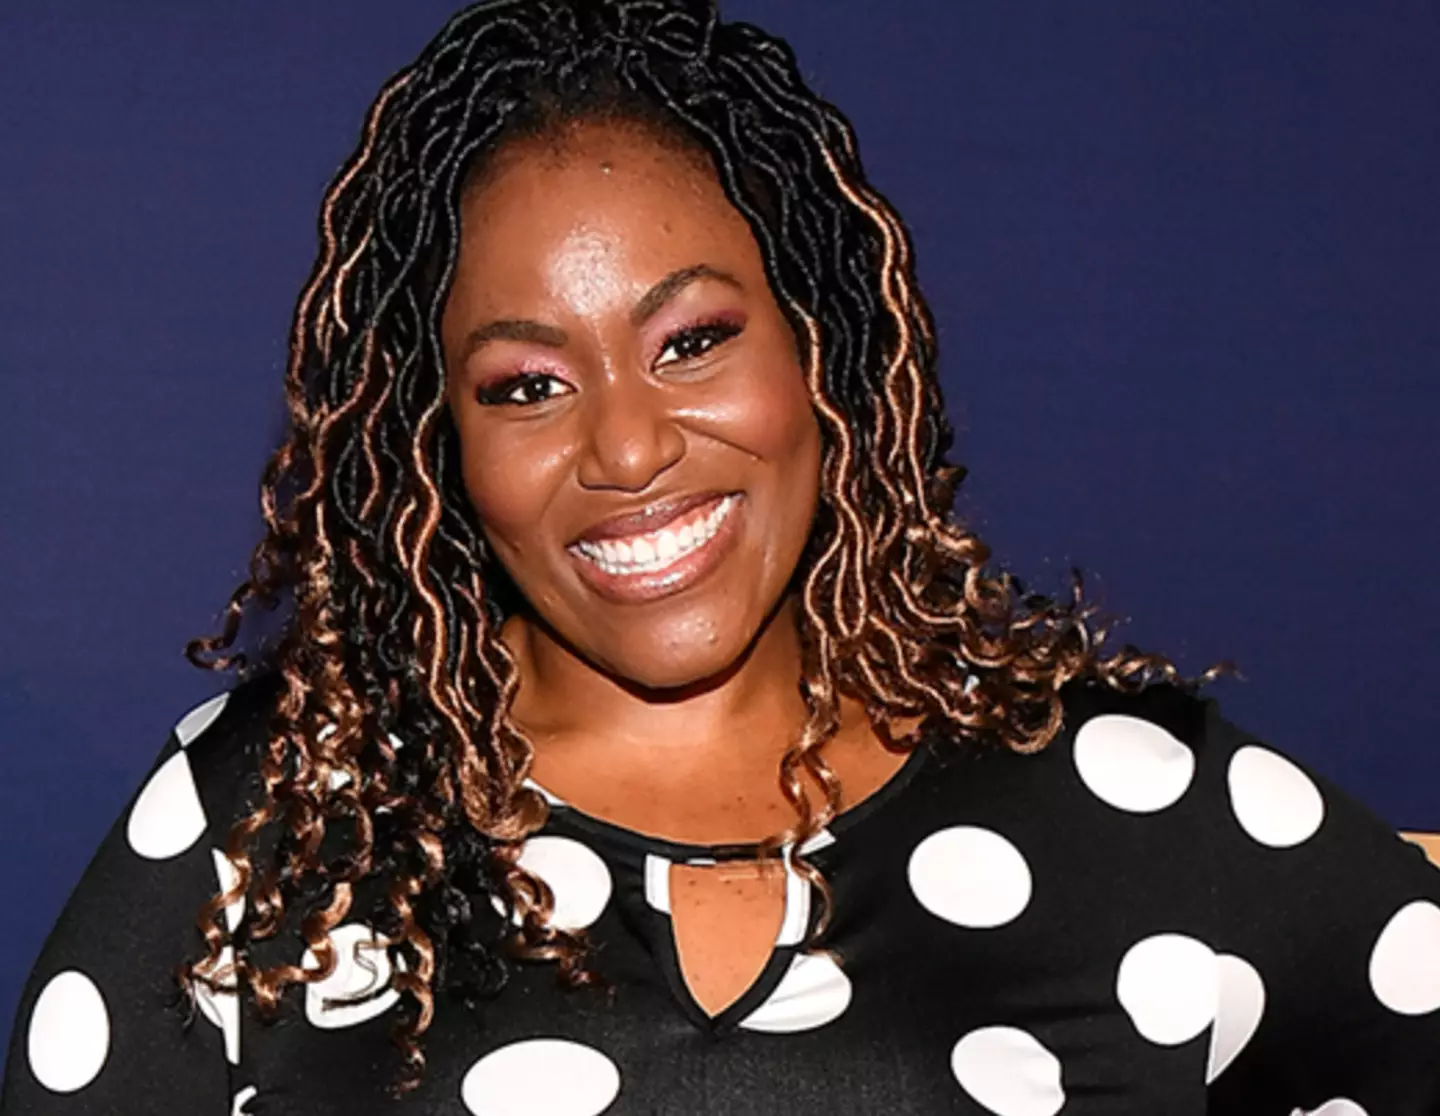 Mandisa's cause of death has not yet been determined. (Paras Griffin/Getty Images for AFFIRM Films A Sony Company)